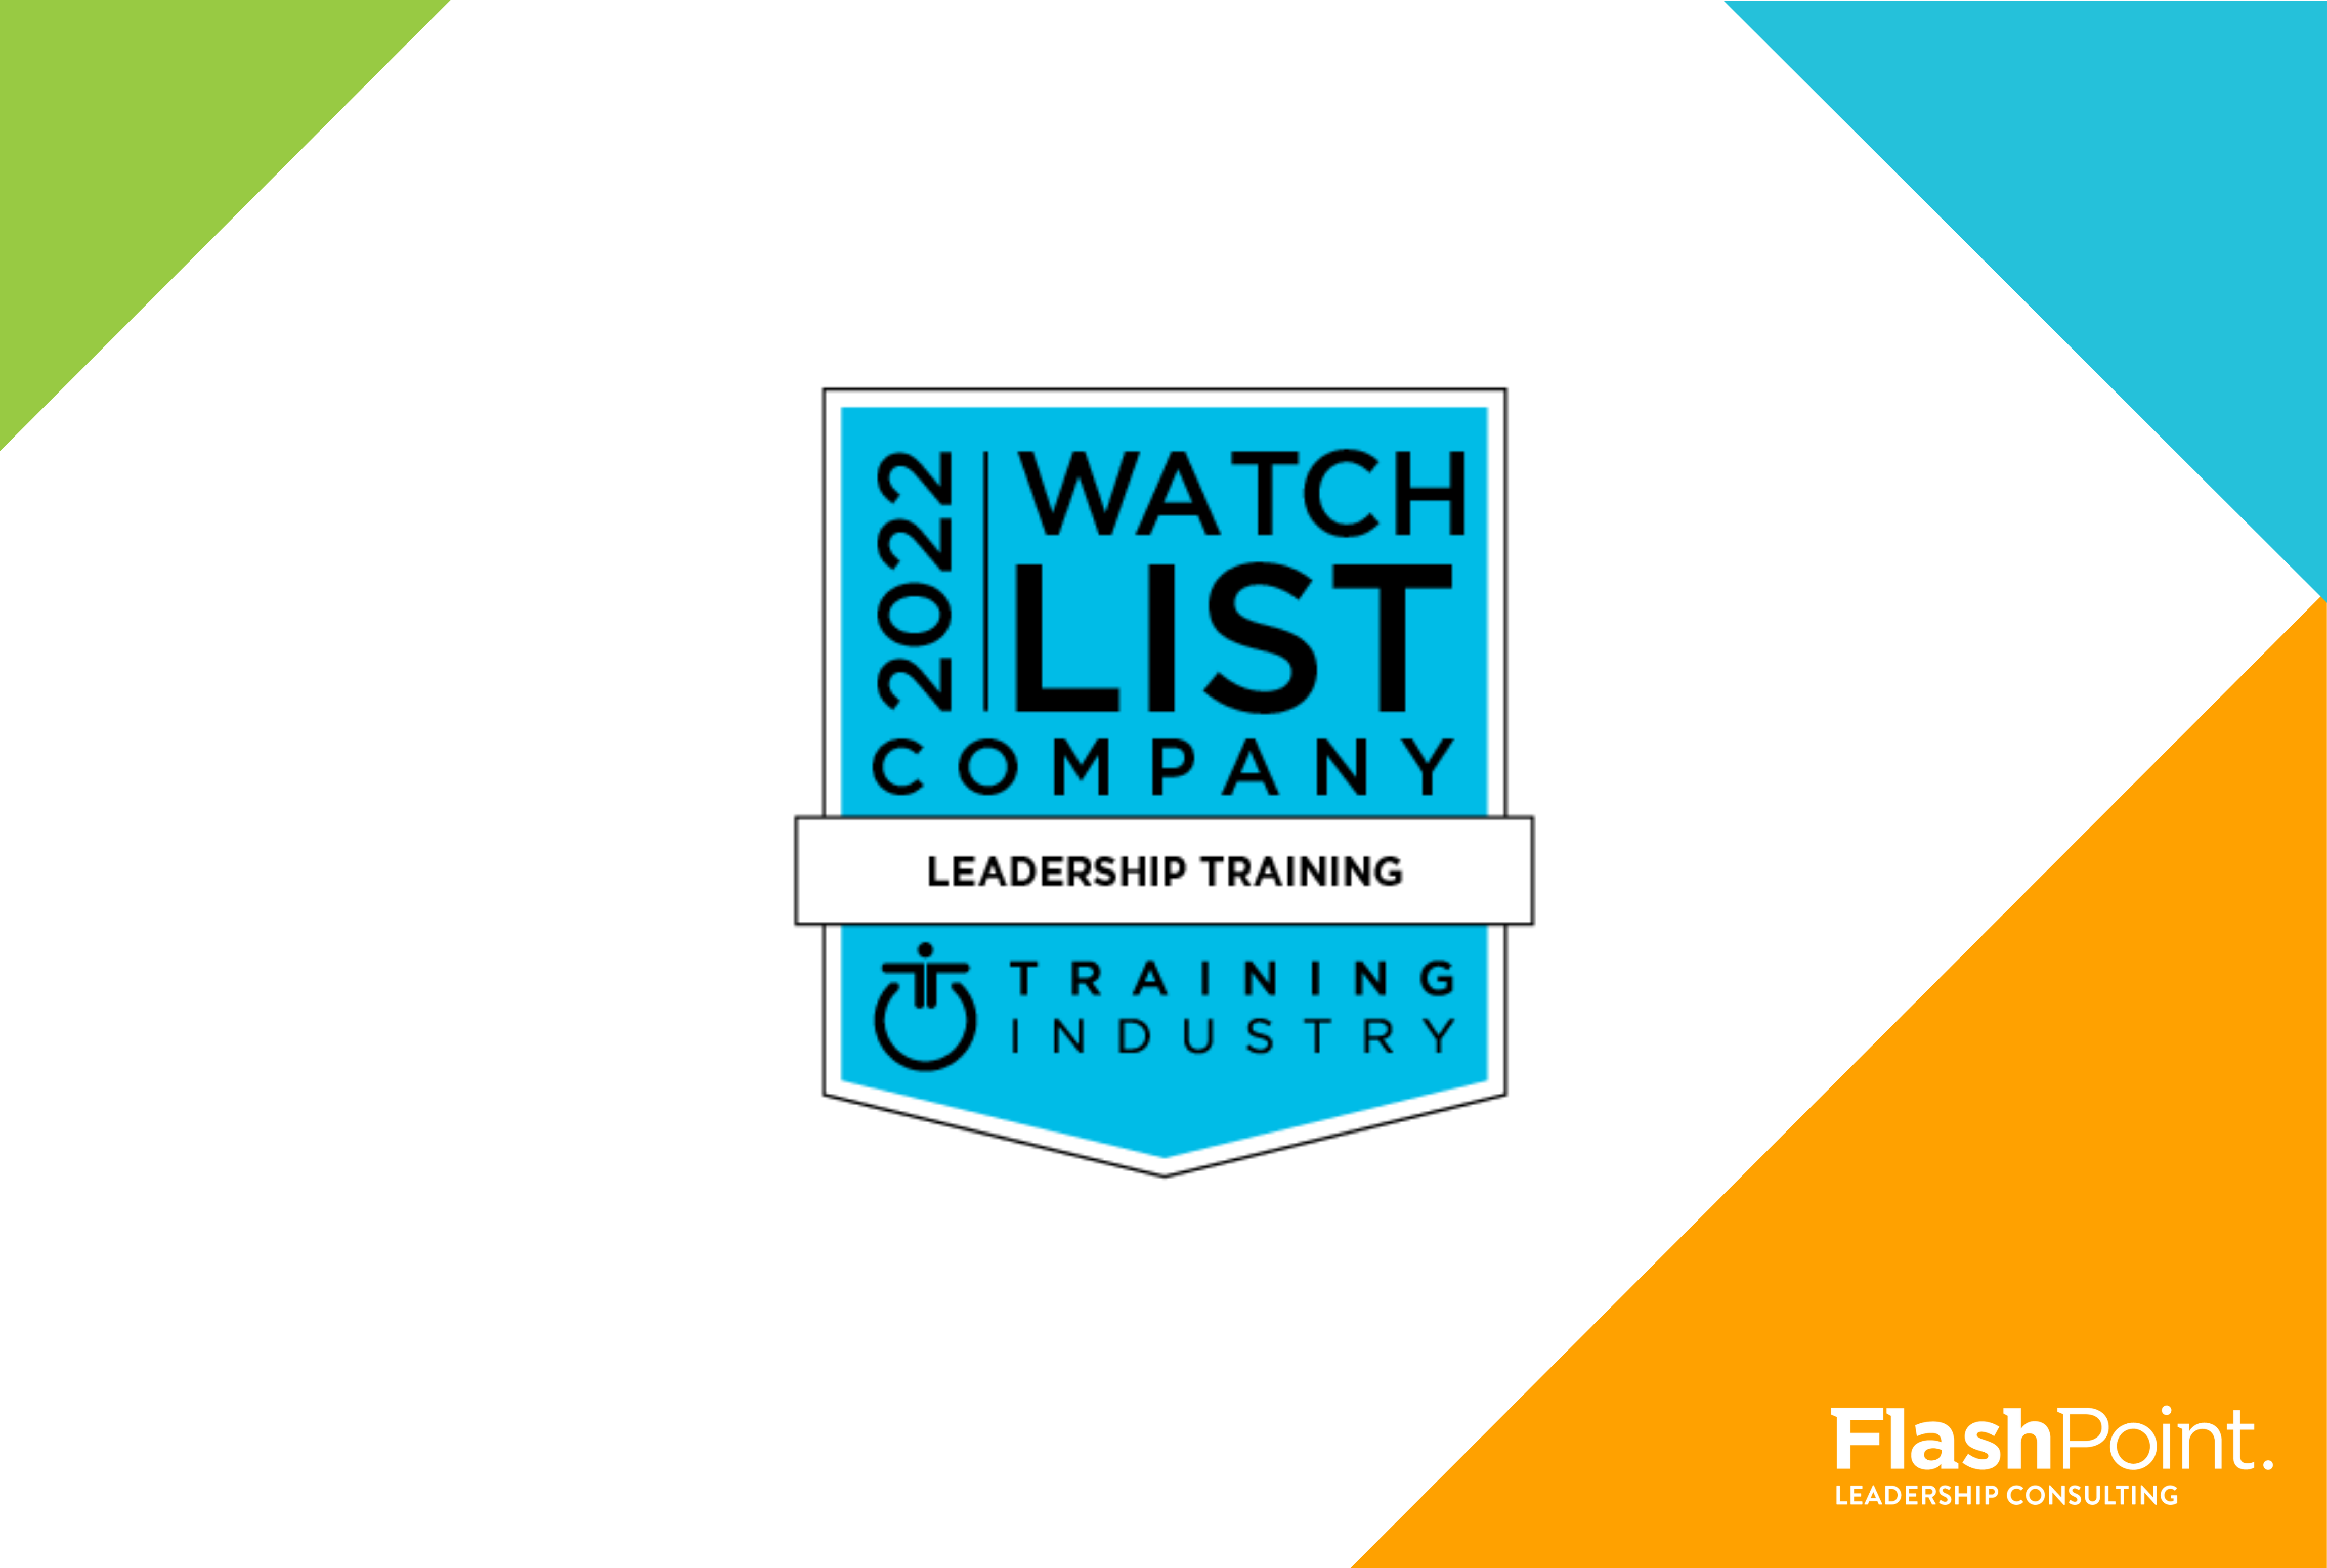 FlashPoint Named to the 2022 Top Leadership Training Companies Watch List